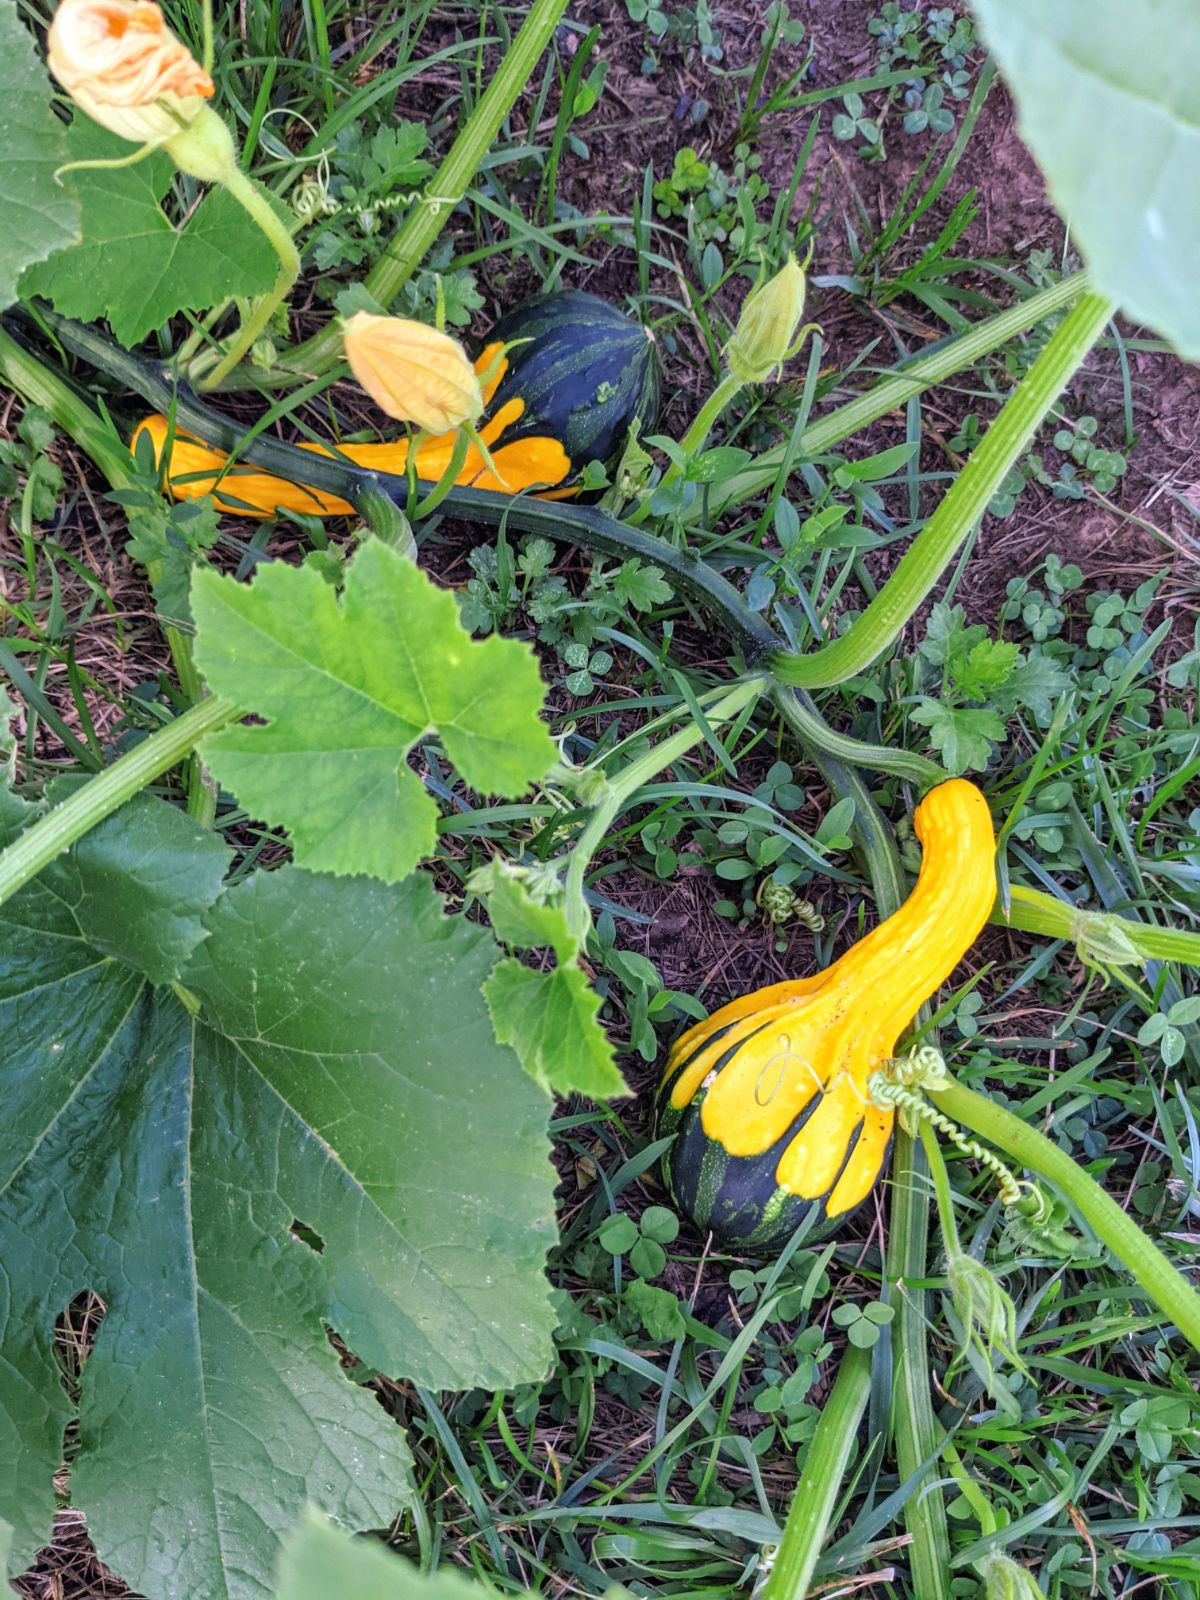 Gourd volunteer plant growing from seed planted by a groundhog or rabbit